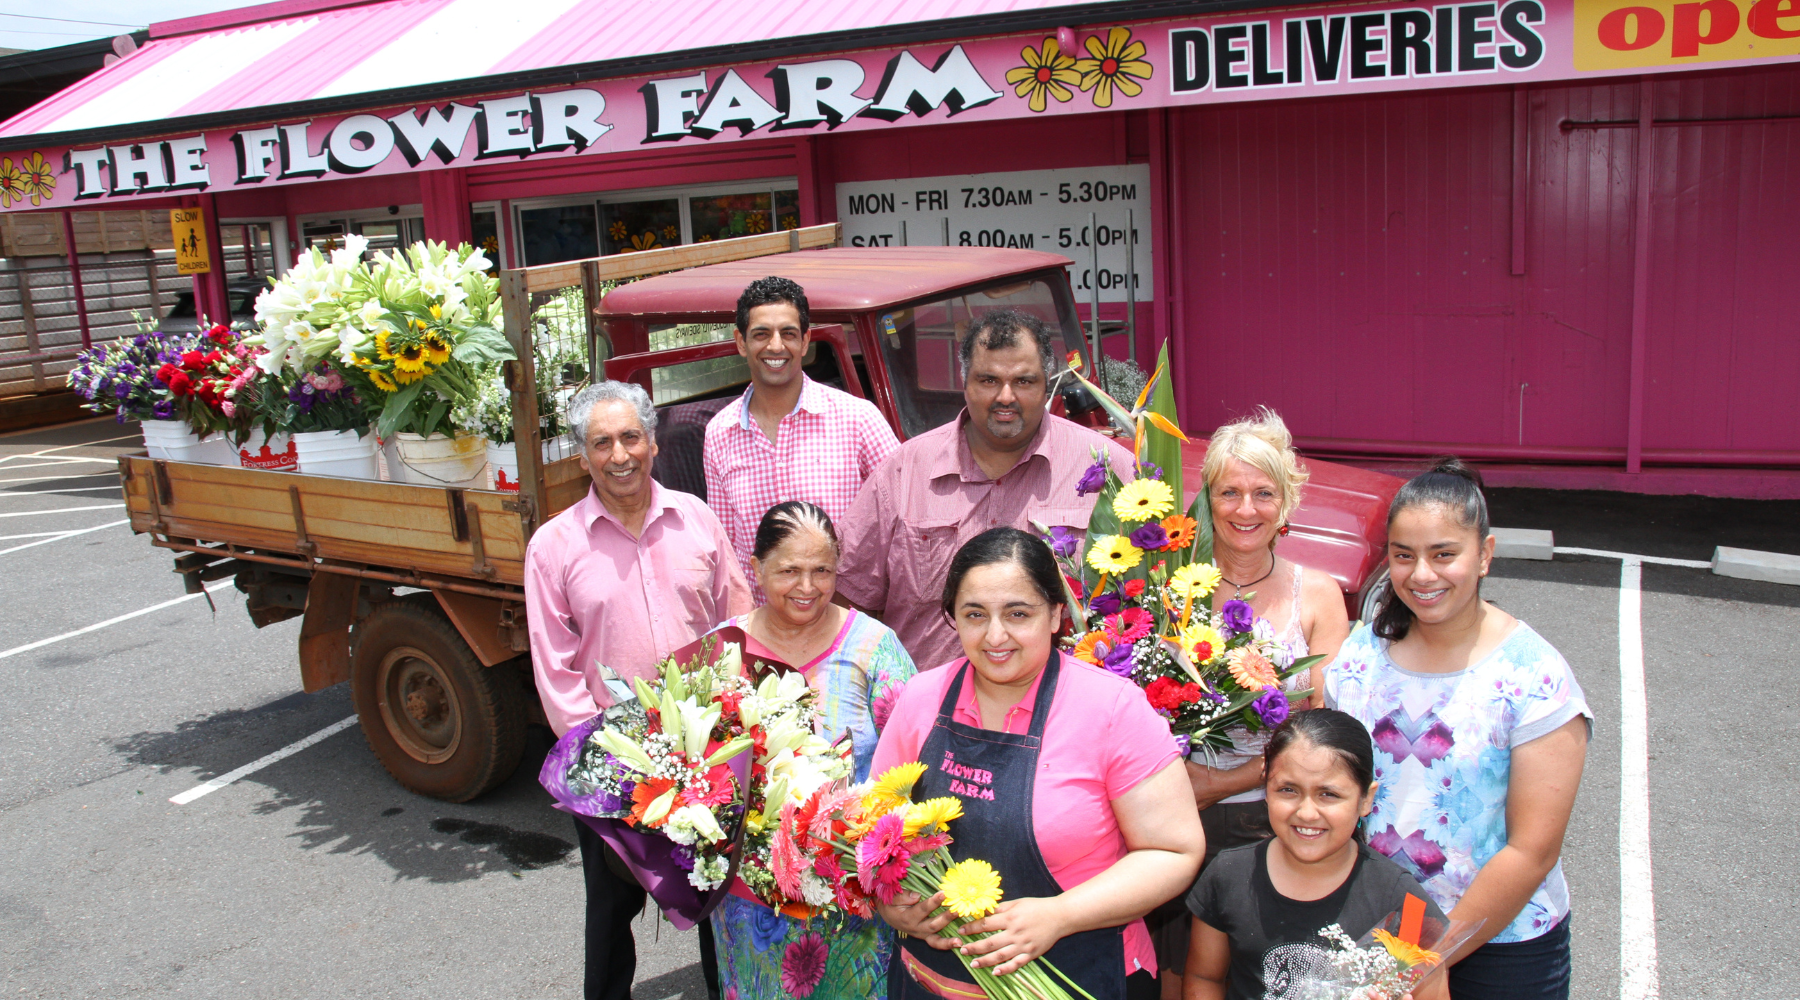 The Flower Farm team holding flowers in front of the Birkdale shop